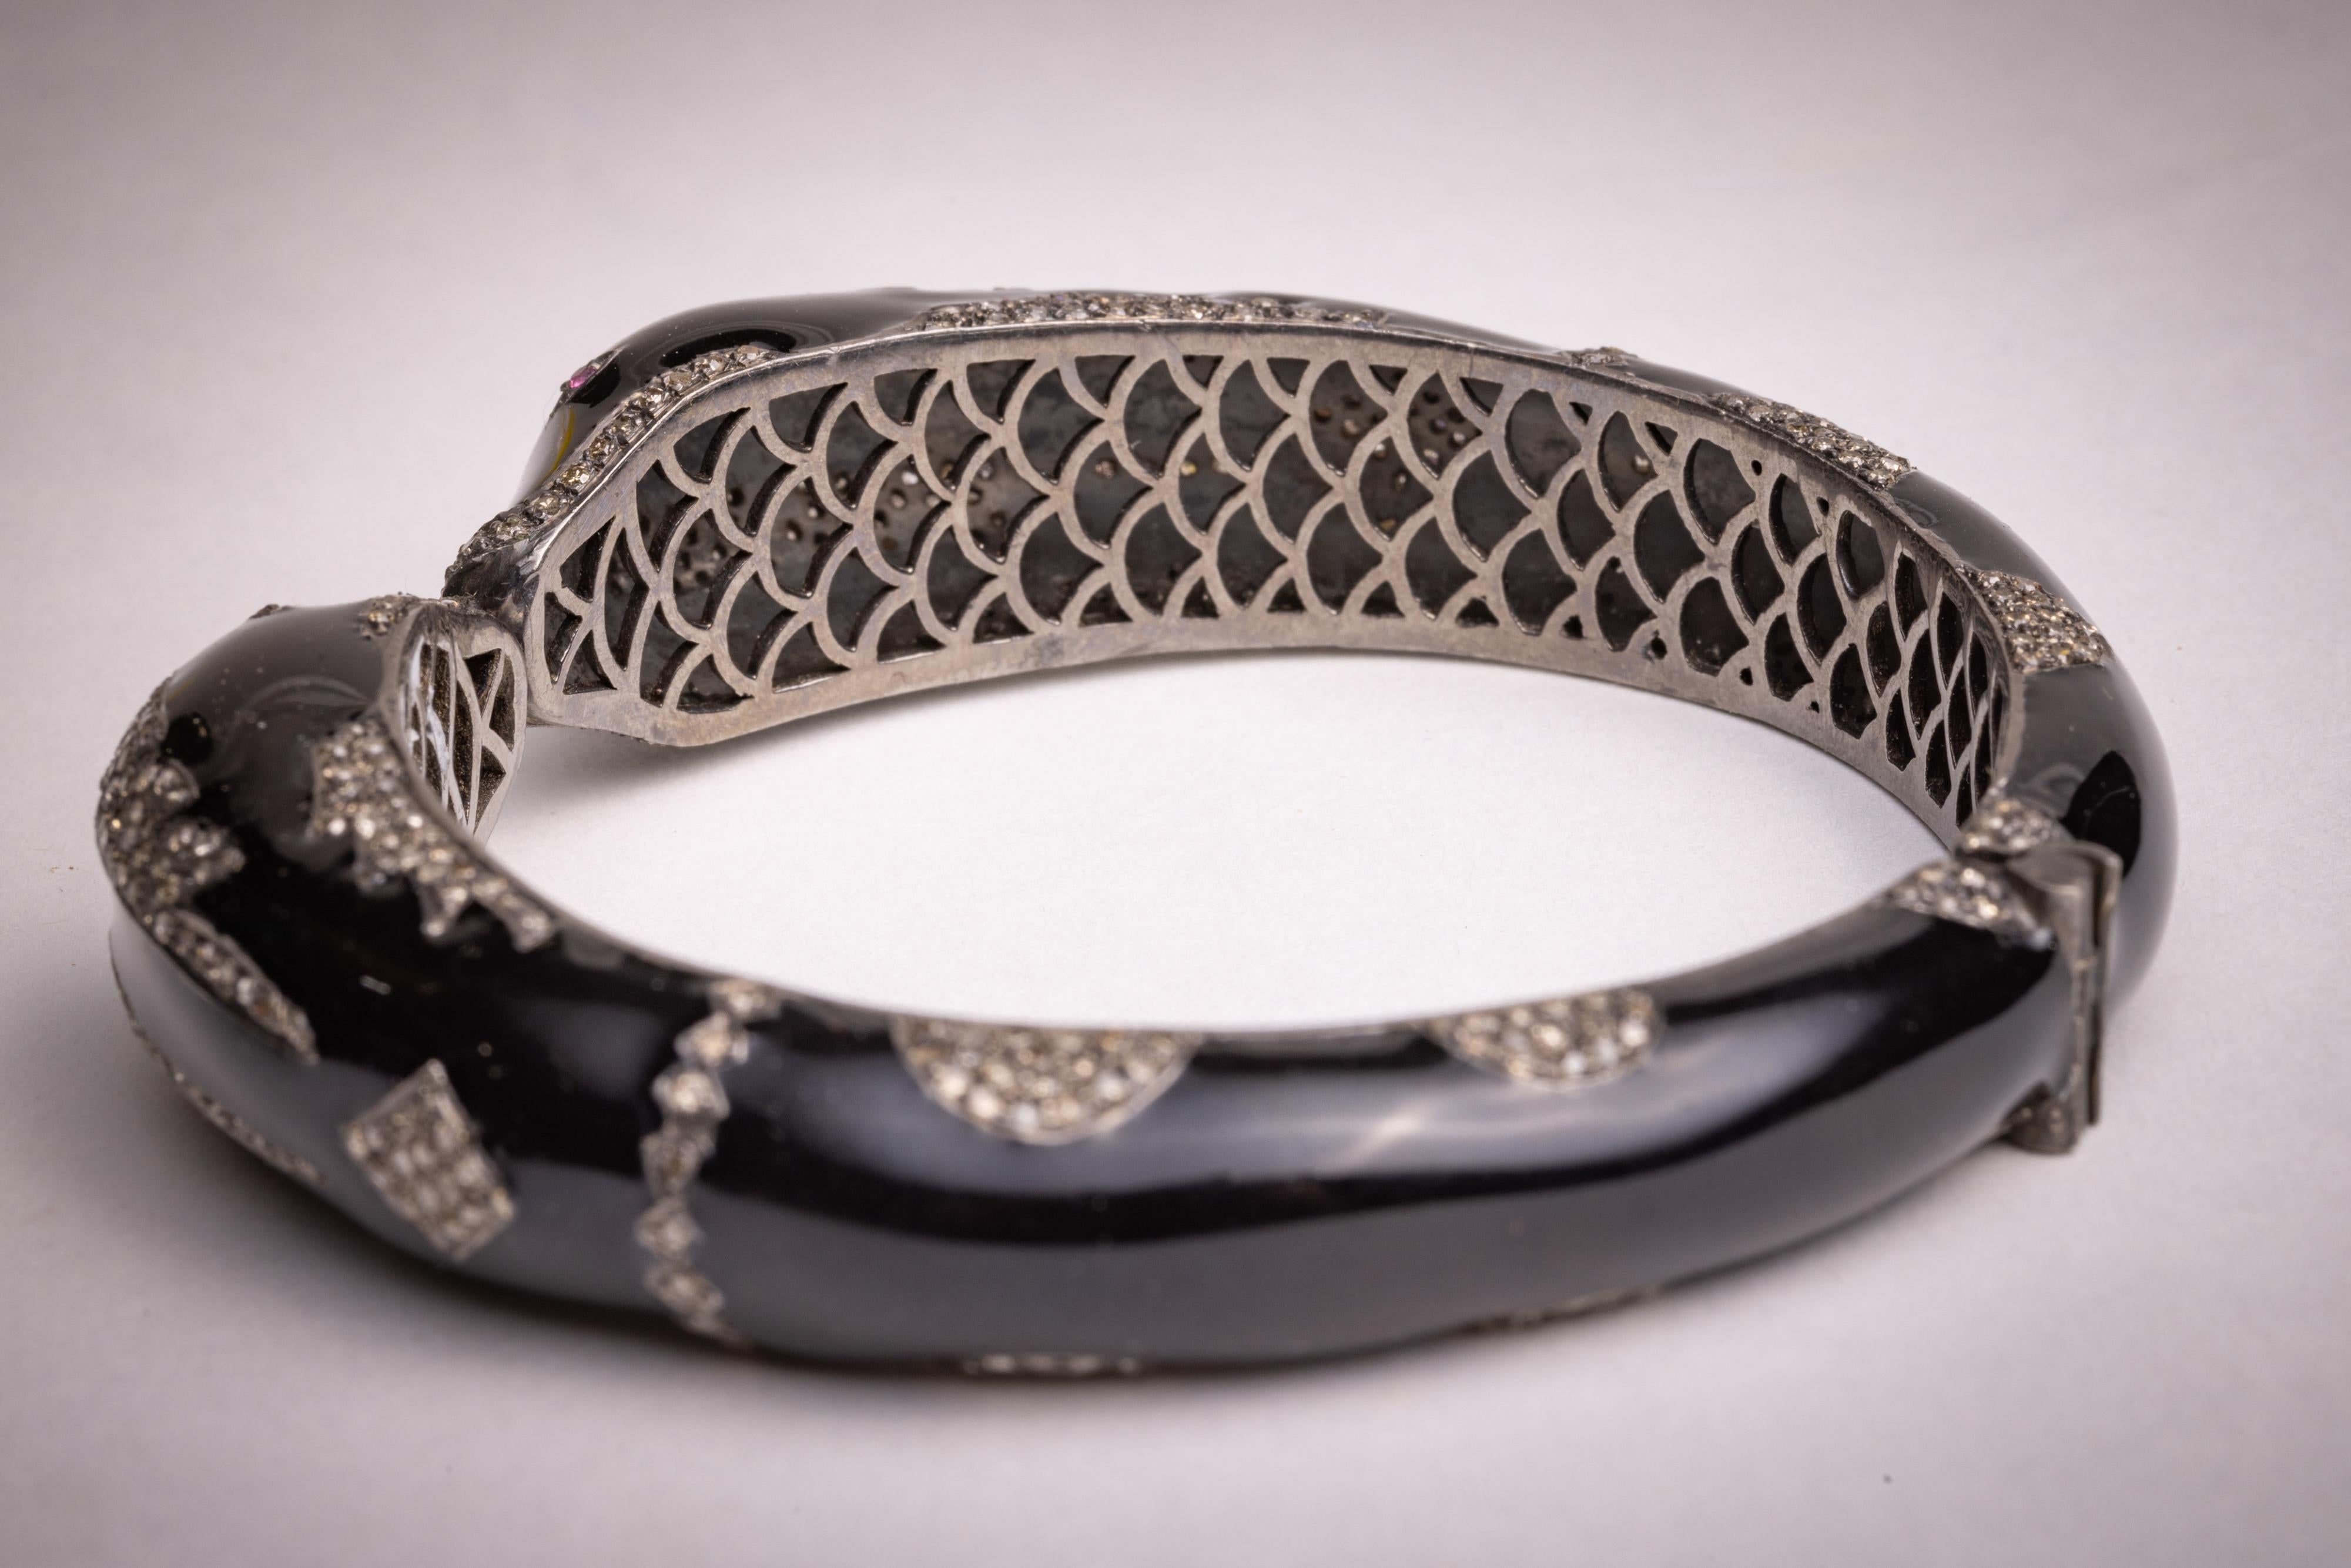 Black Enamel and Diamond Snake Cuff Bangle Bracelet In Excellent Condition For Sale In Nantucket, MA